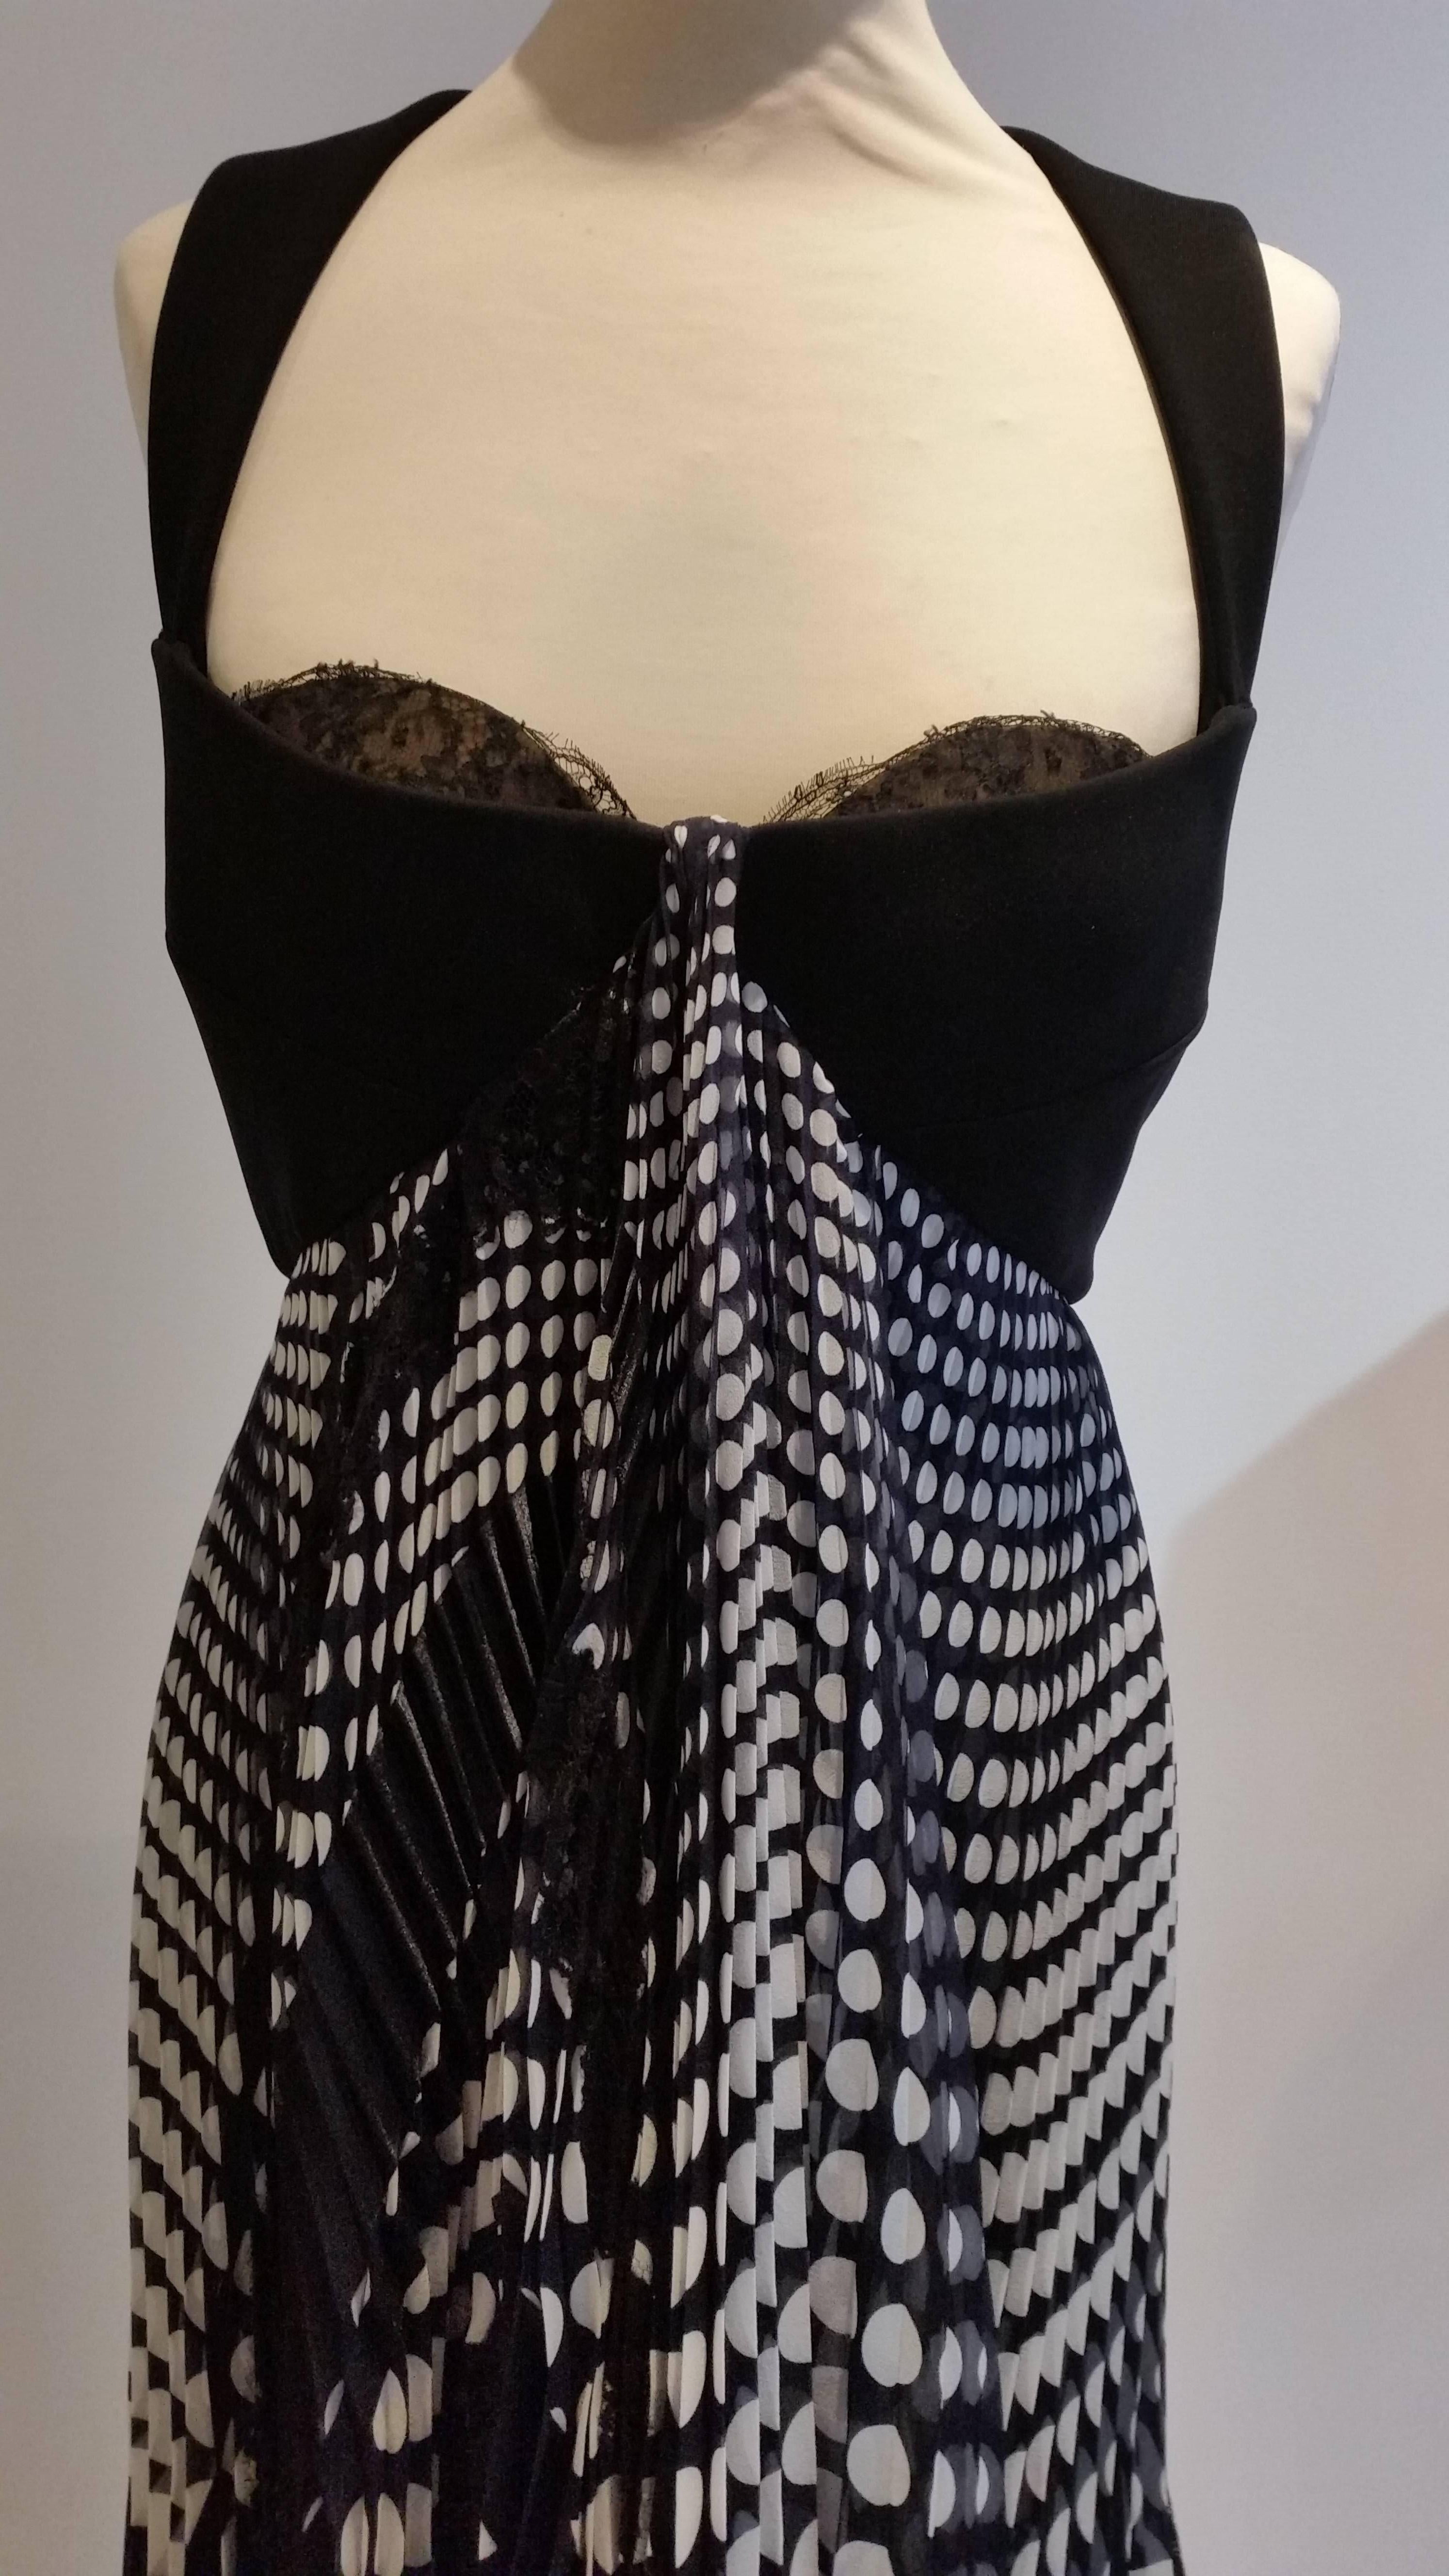 A stunning example of one of the most stylish, designers: Gianfrancoferre.
Black and white full length evening gown which looks very Flamenco in style.
Sweetheart neckline
Various layers of the most sumptuous silk and lace, typical of GFF.
Accordion